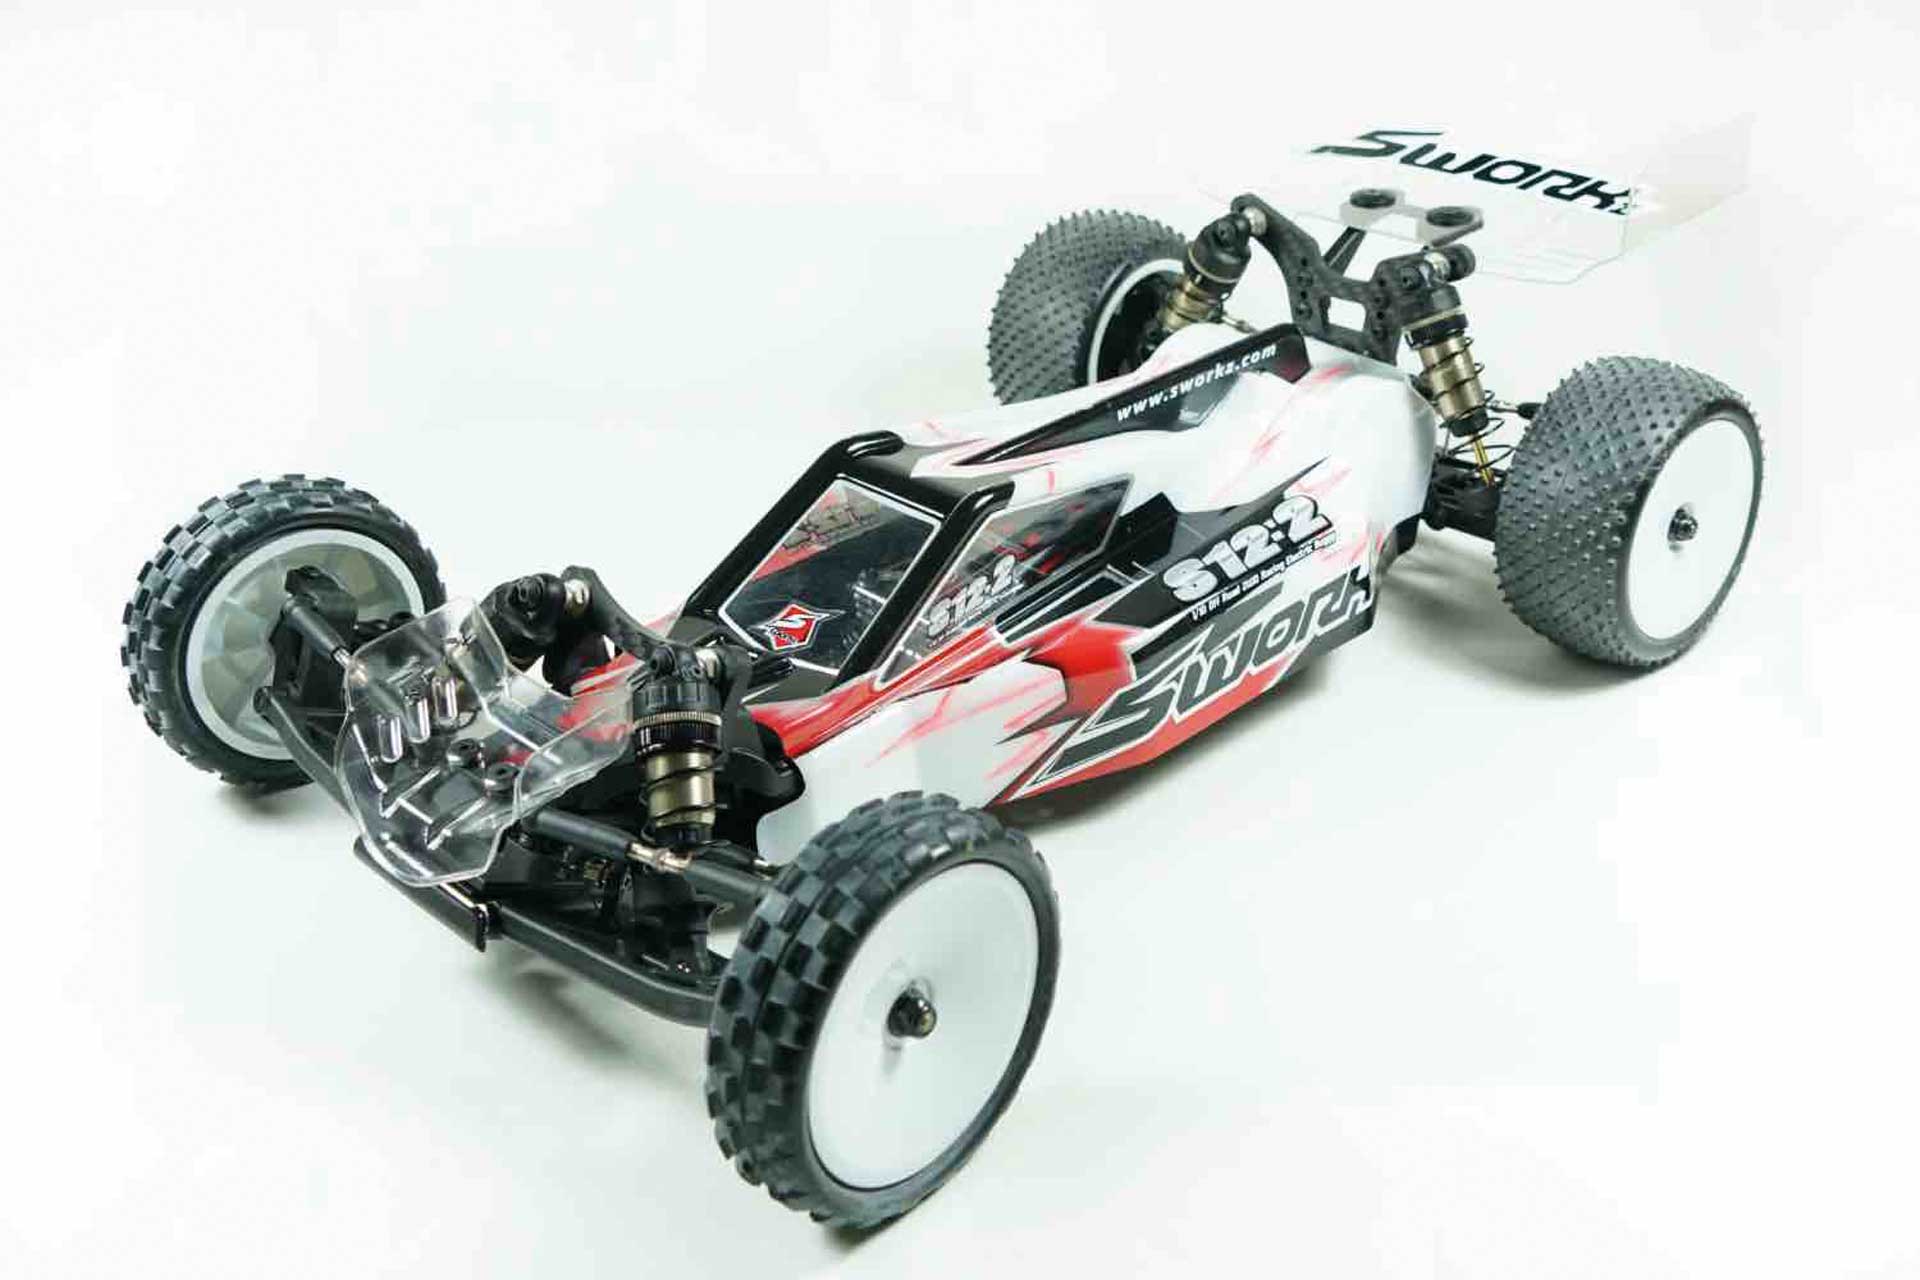 SWORKZ S12-2C(Carpet Edition) 1/10 2WD EP Off Road Racing Buggy Pro Kit